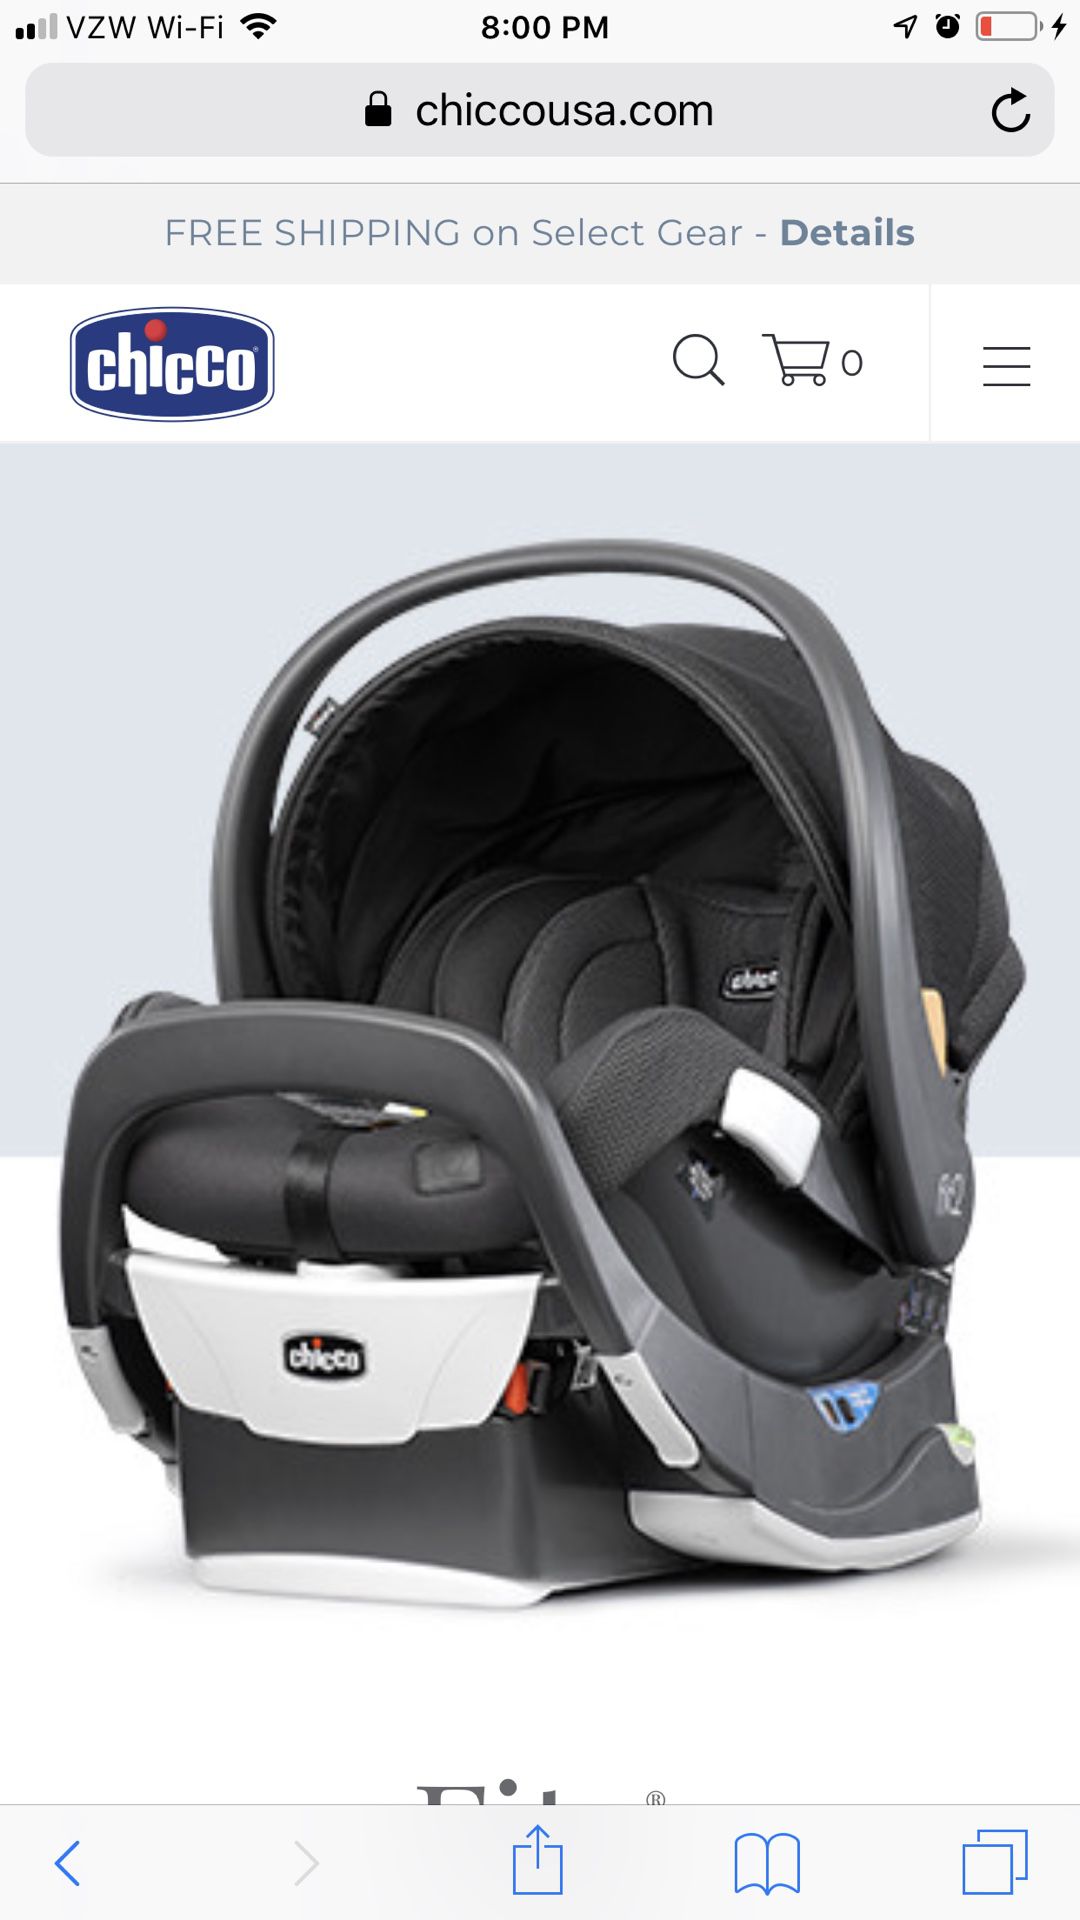 Chicco Fit2 car seat, like new